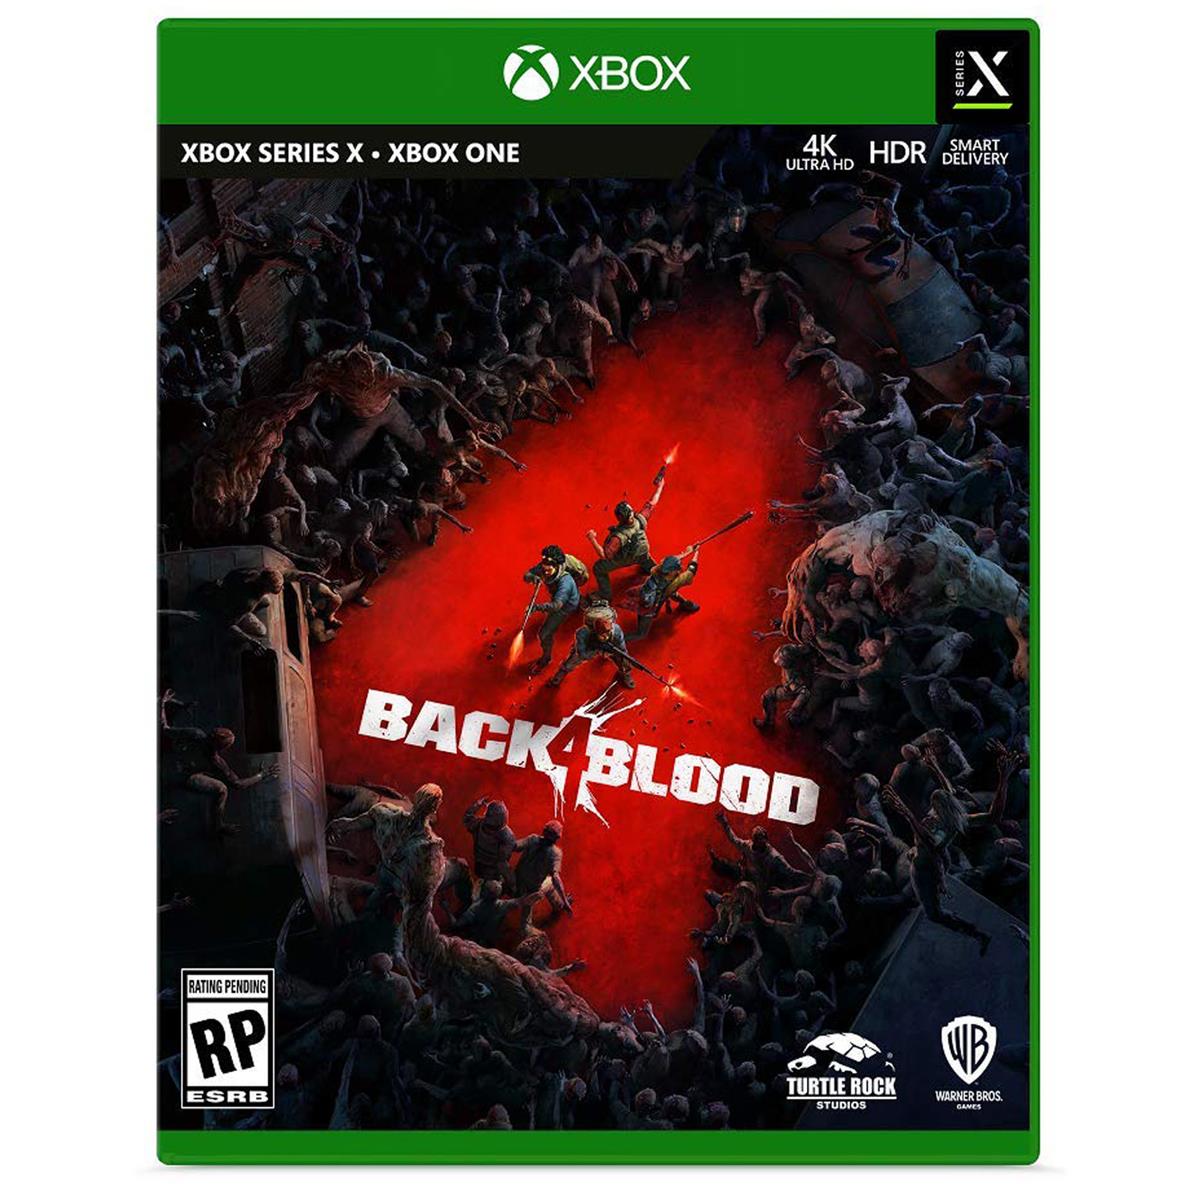 Photos - Computer Chair Warner Bros Games Warner Back 4 Blood Standard Edition for Xbox One and Xb